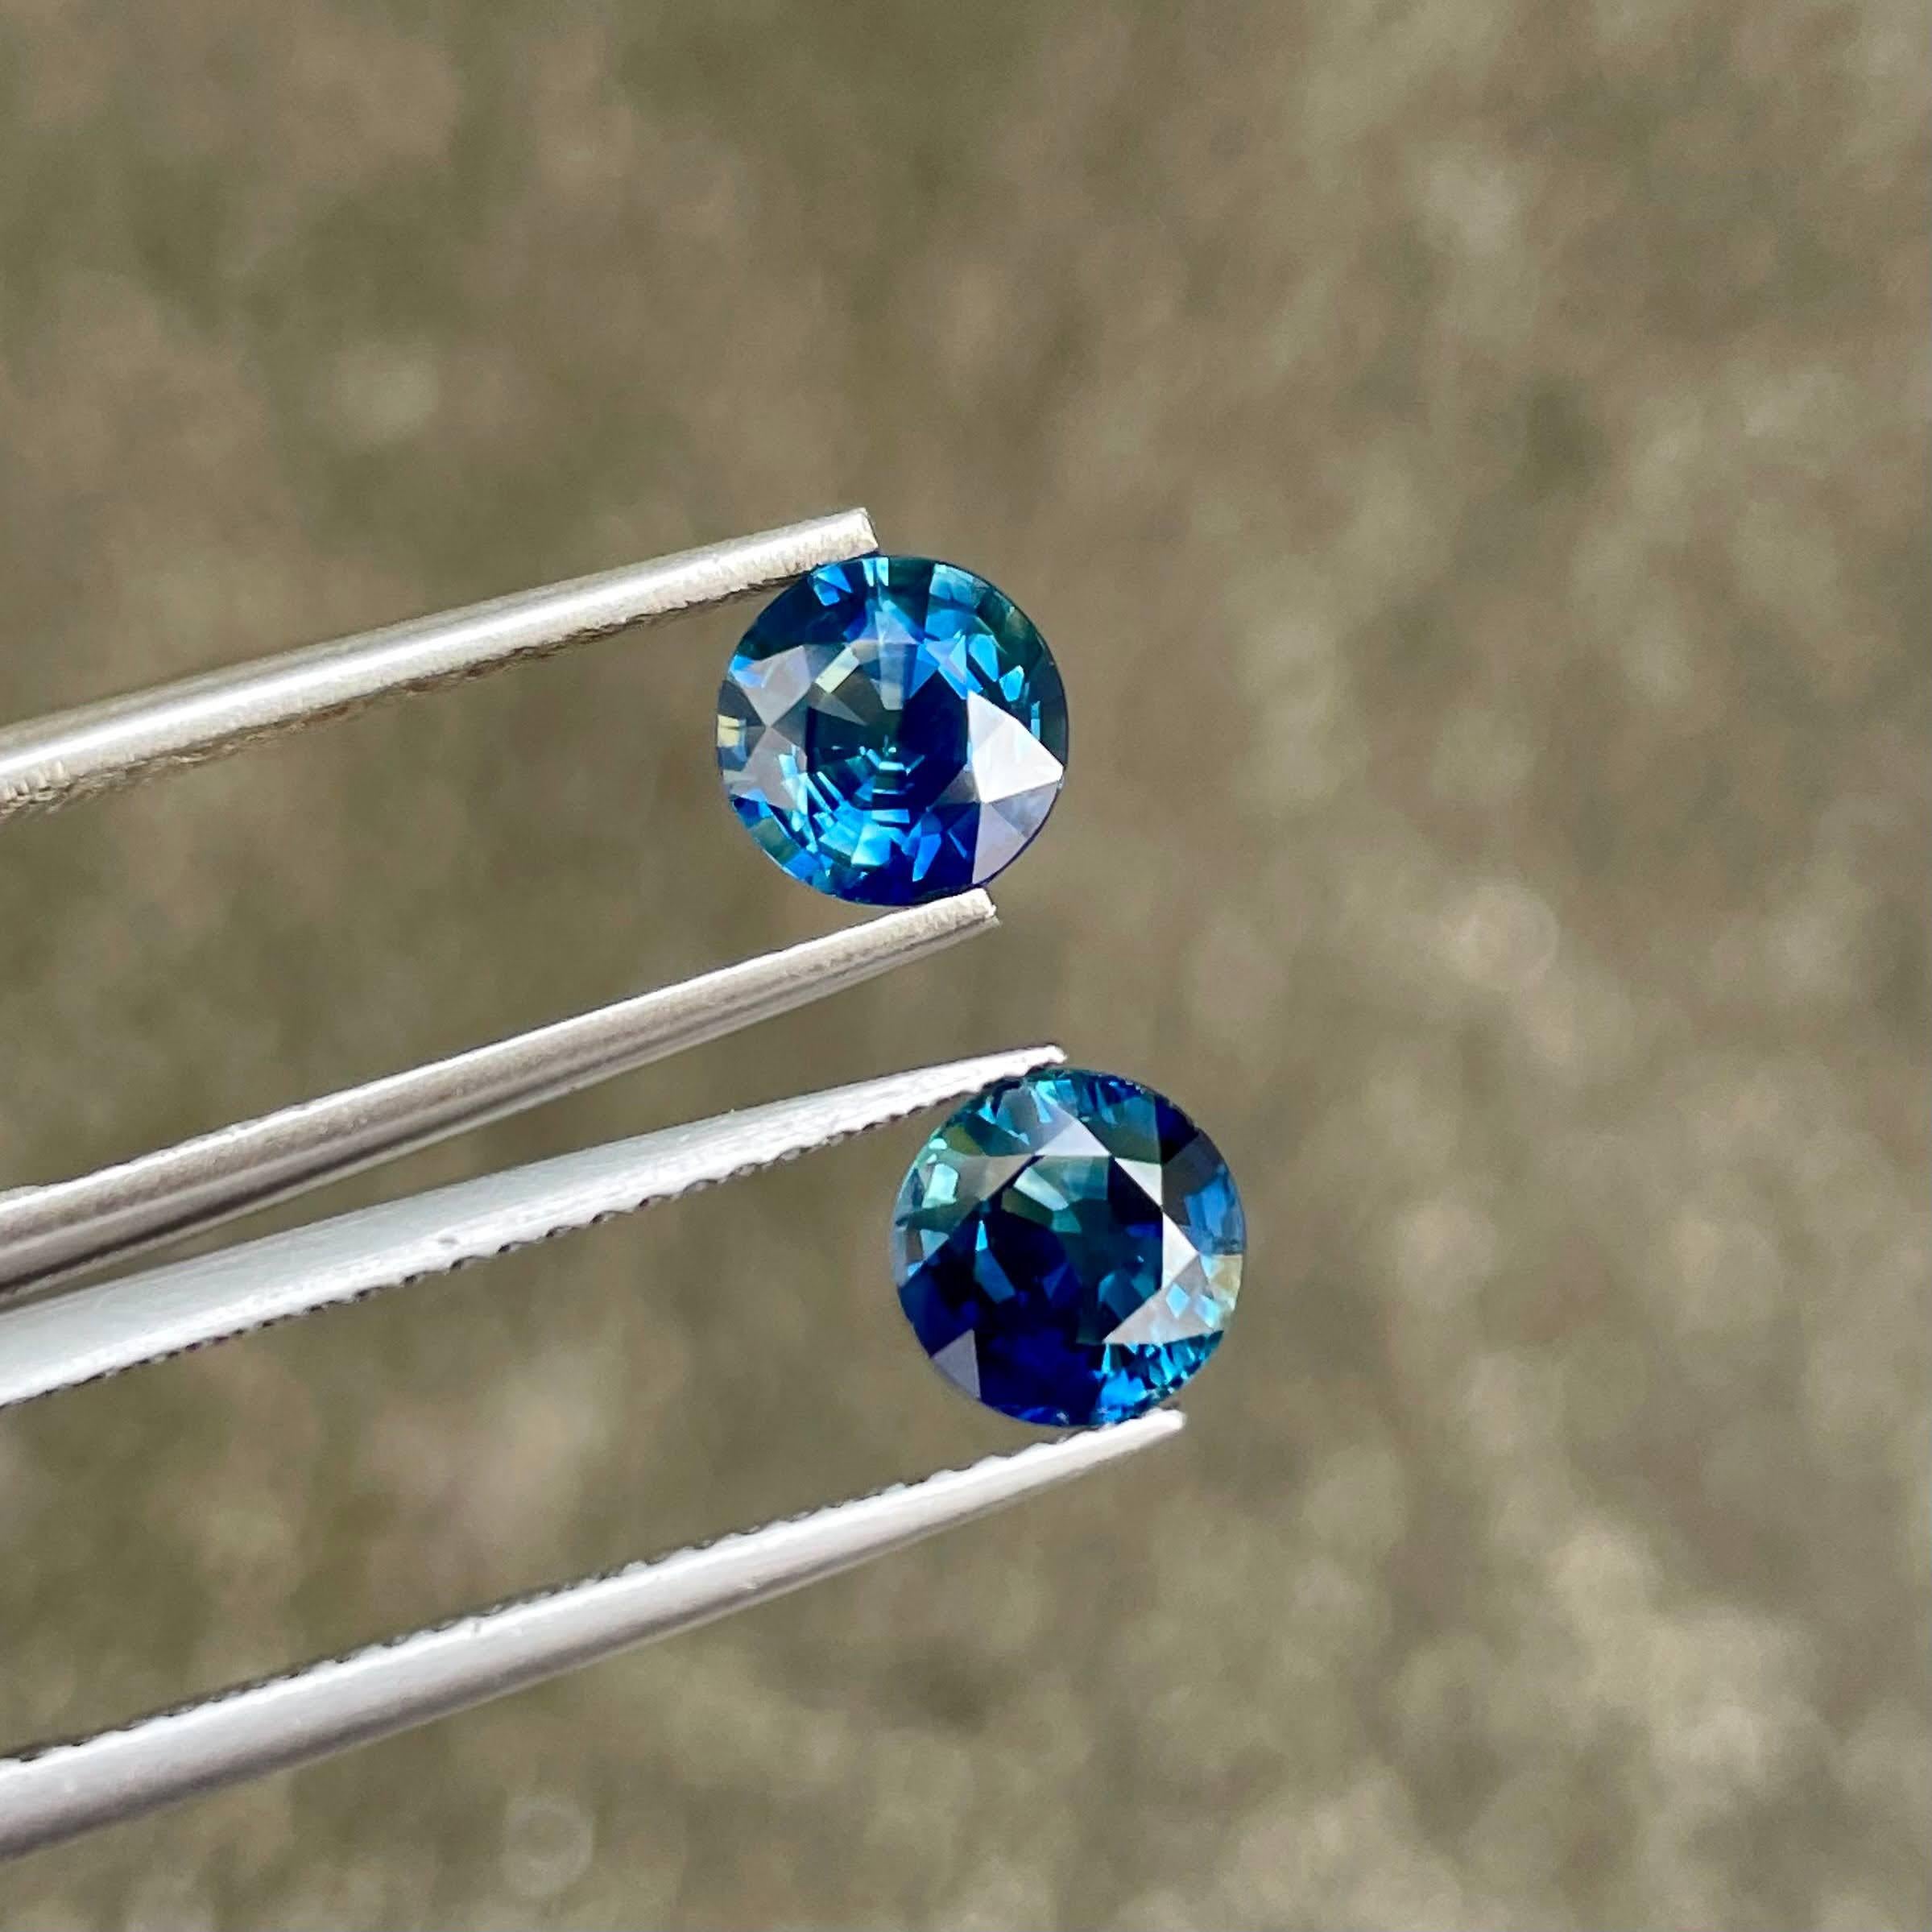 Weight 2.01 carats (for pair)
Dimensions 6.1x6.0x3.5 mm
Treatment heated
Clarity VVS
Origin Madagascar 
Shape round 
Cut round brilliant 




Behold the mesmerizing beauty of a 2.01 carat pair of Teal Blue Sapphires, impeccably crafted in a Round